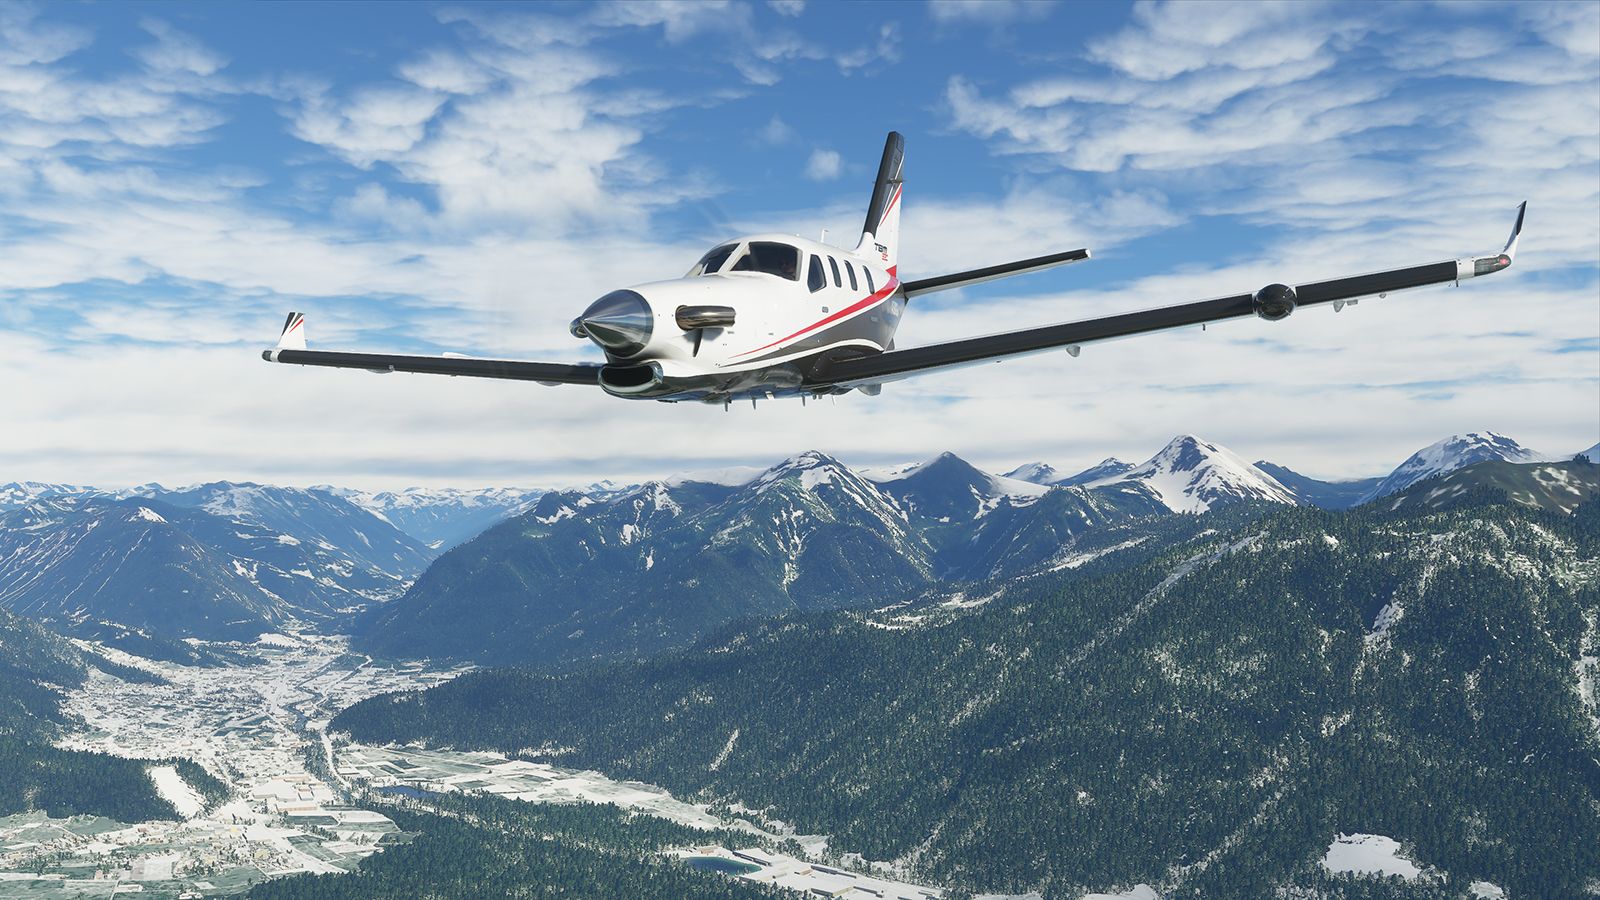 Microsoft Flight Simulator 2024' Announced Amid No Mention of VR Support